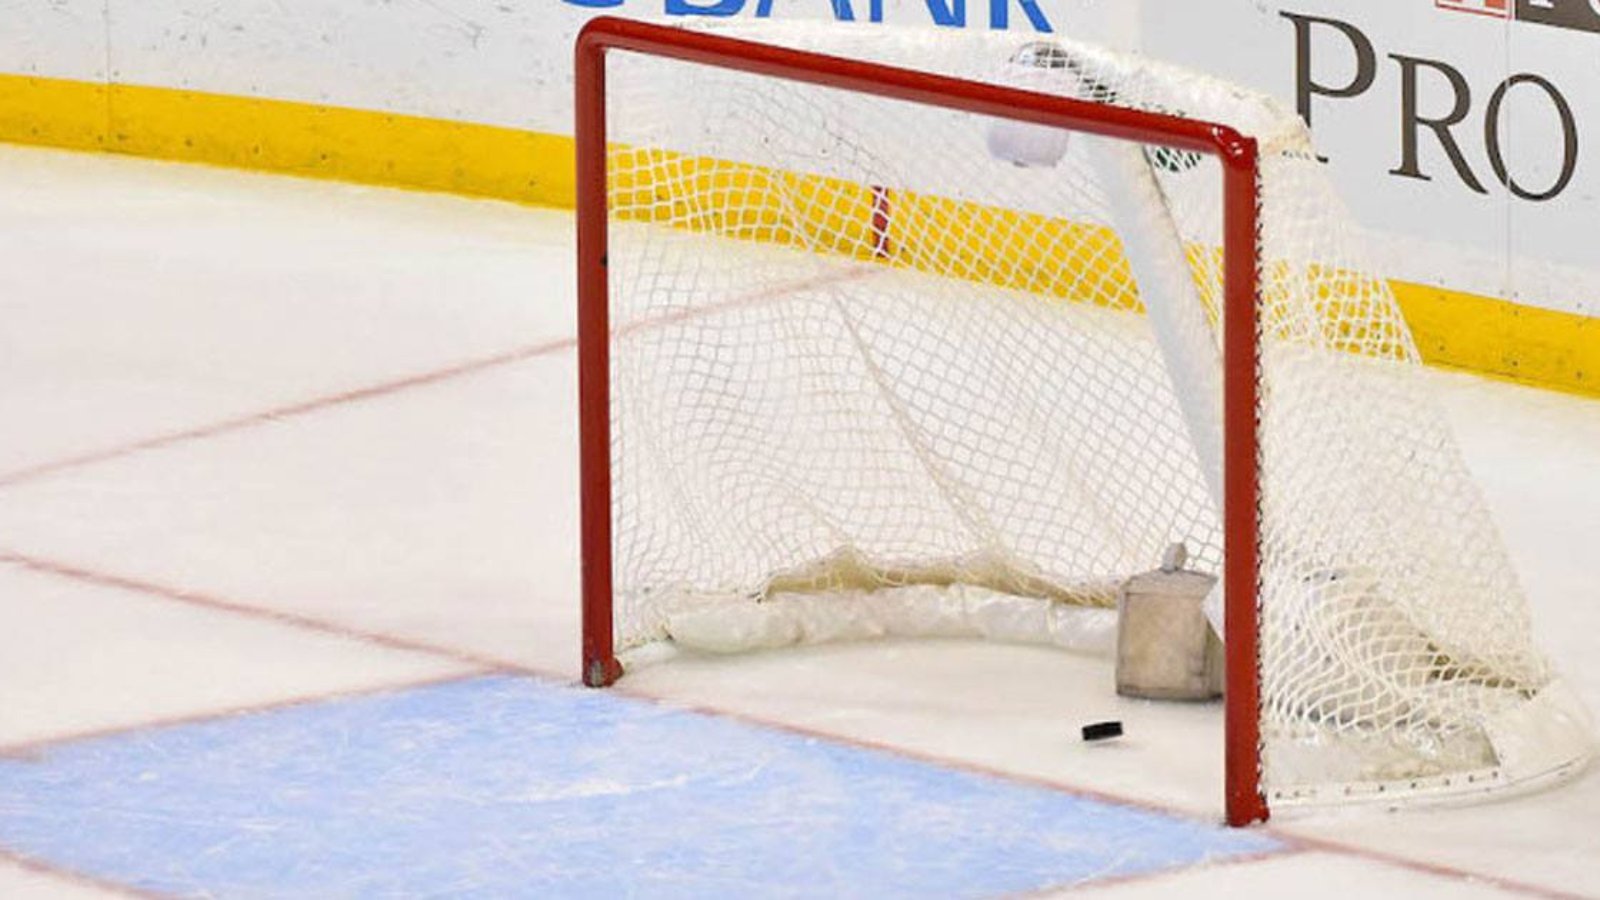 Breaking: Undrafted goalie signs with Cup contender